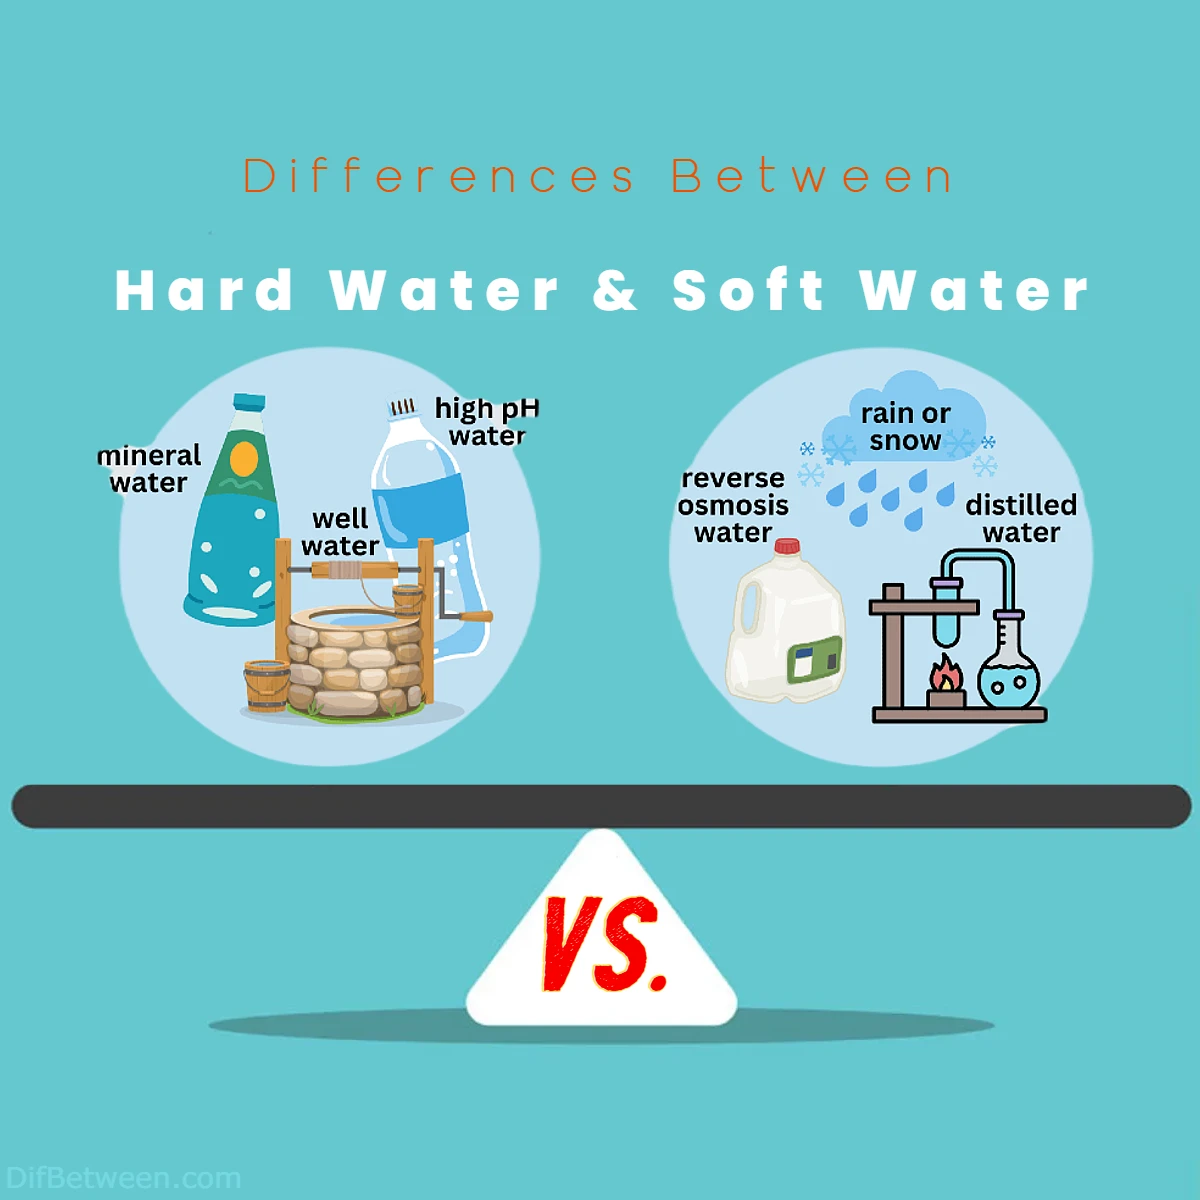 Differences Between Hard Water vs Soft Water